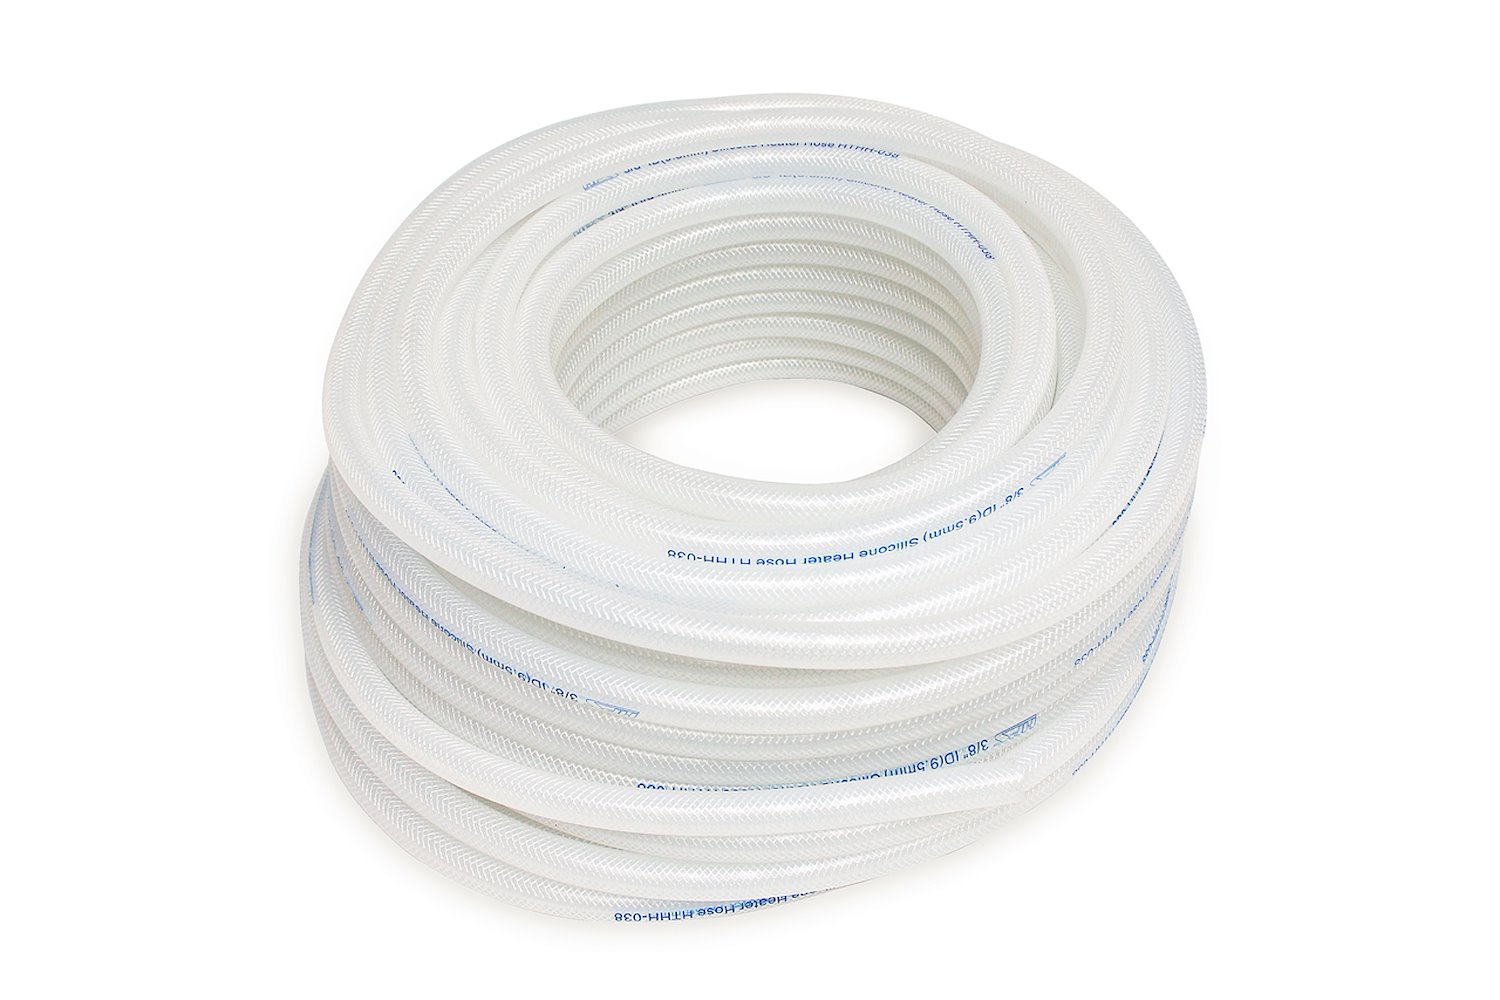 HTHH-062-CLEARx250 Silicone Heater Hose Tubing, High-Temp Reinforced, 5/8 in. ID, 250 ft. Roll, Clear